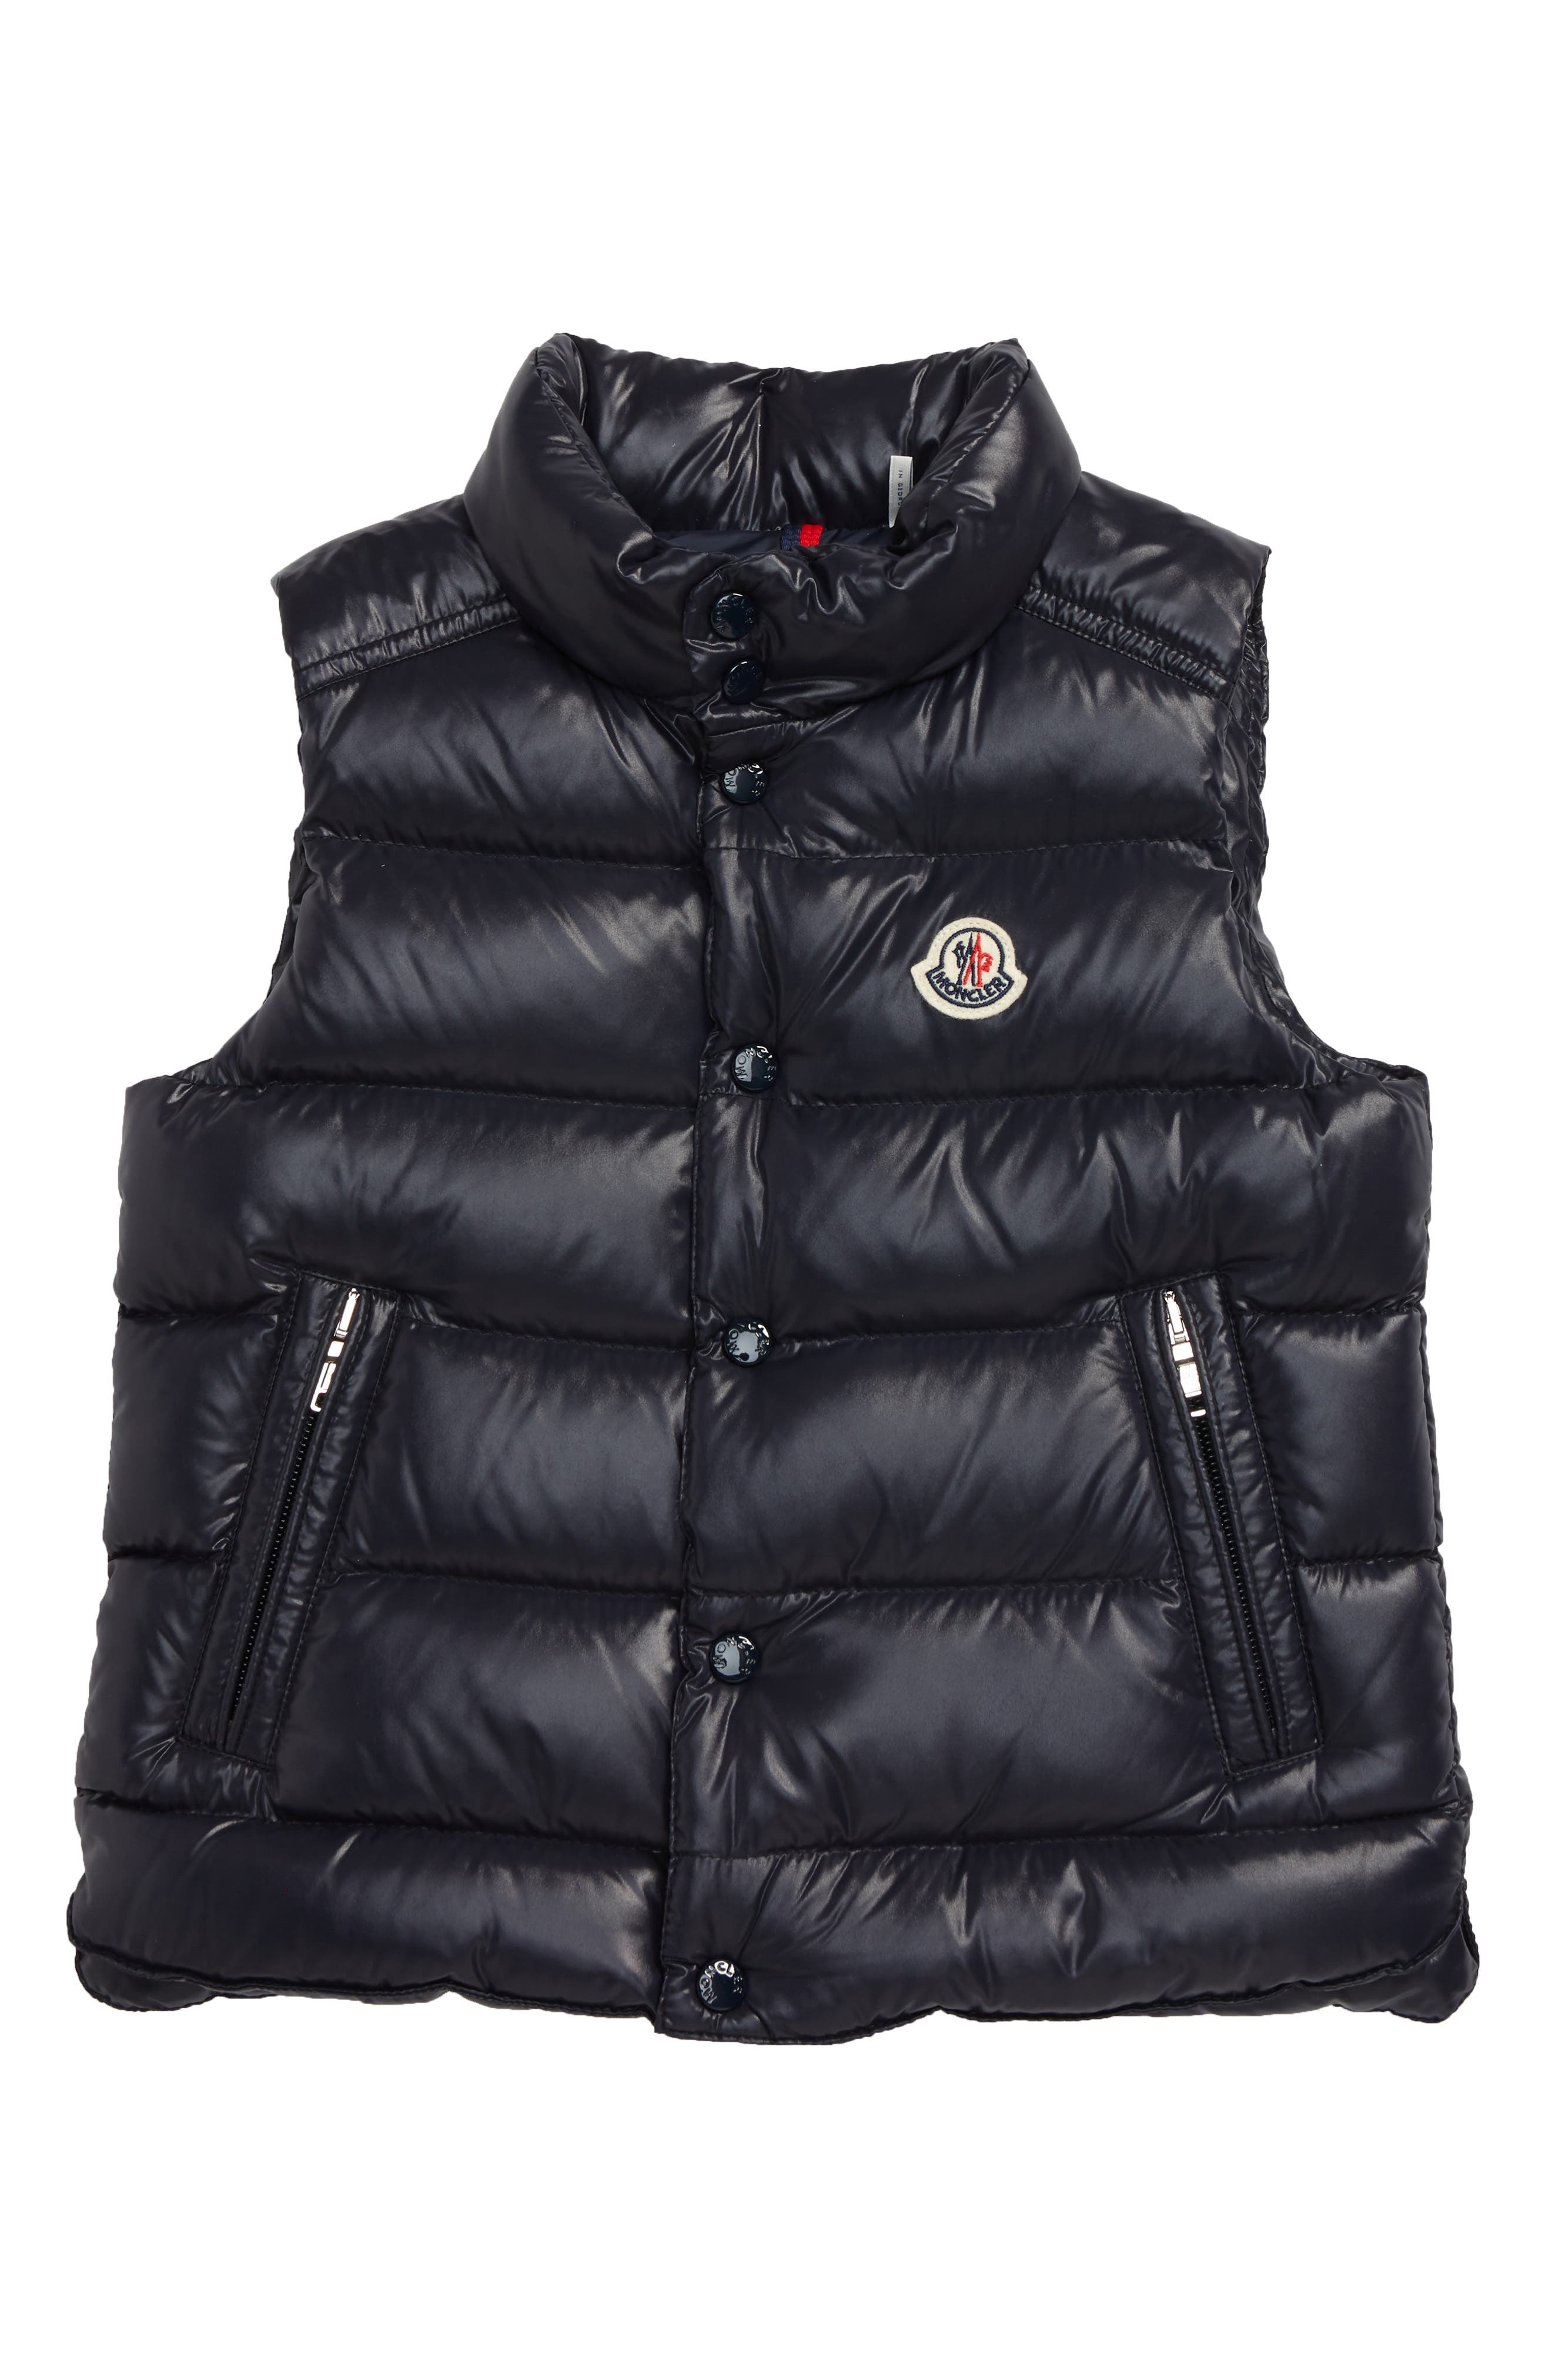 moncler jacket for toddlers